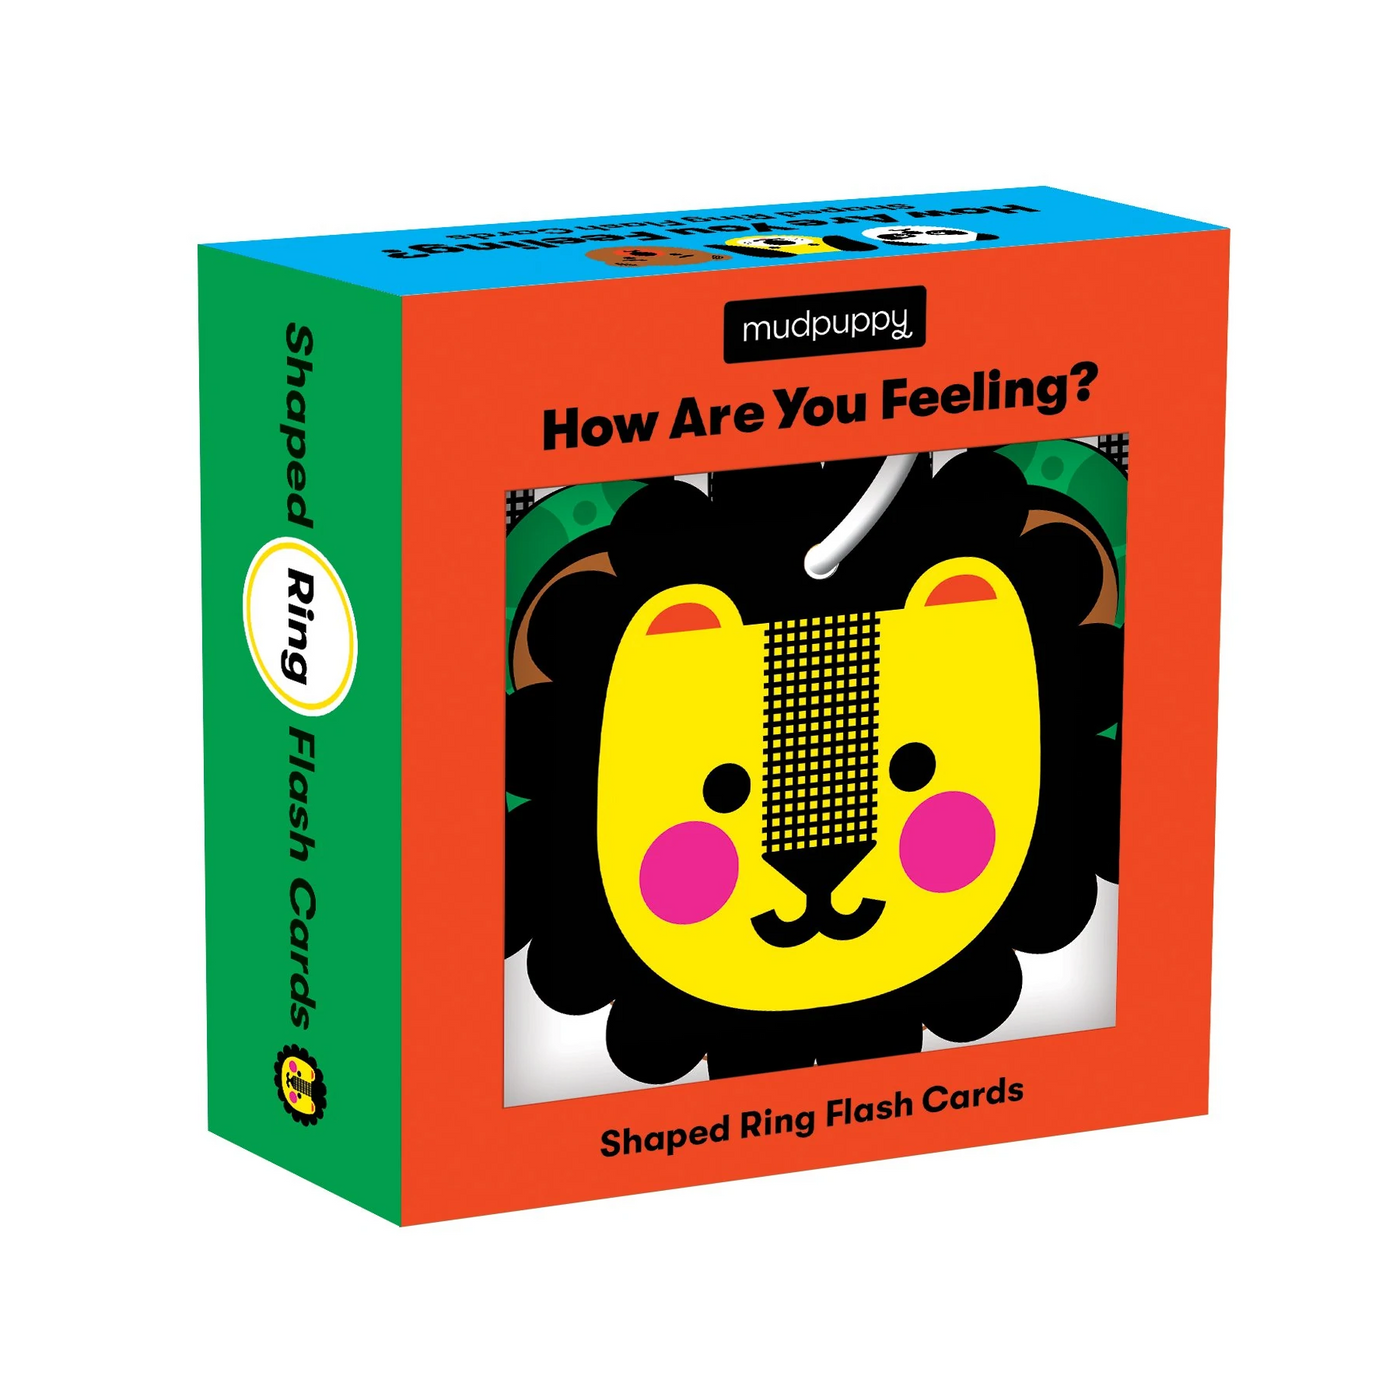 Mudpuppy Games: How Are You Feeling? Shaped Ring Flash Cards